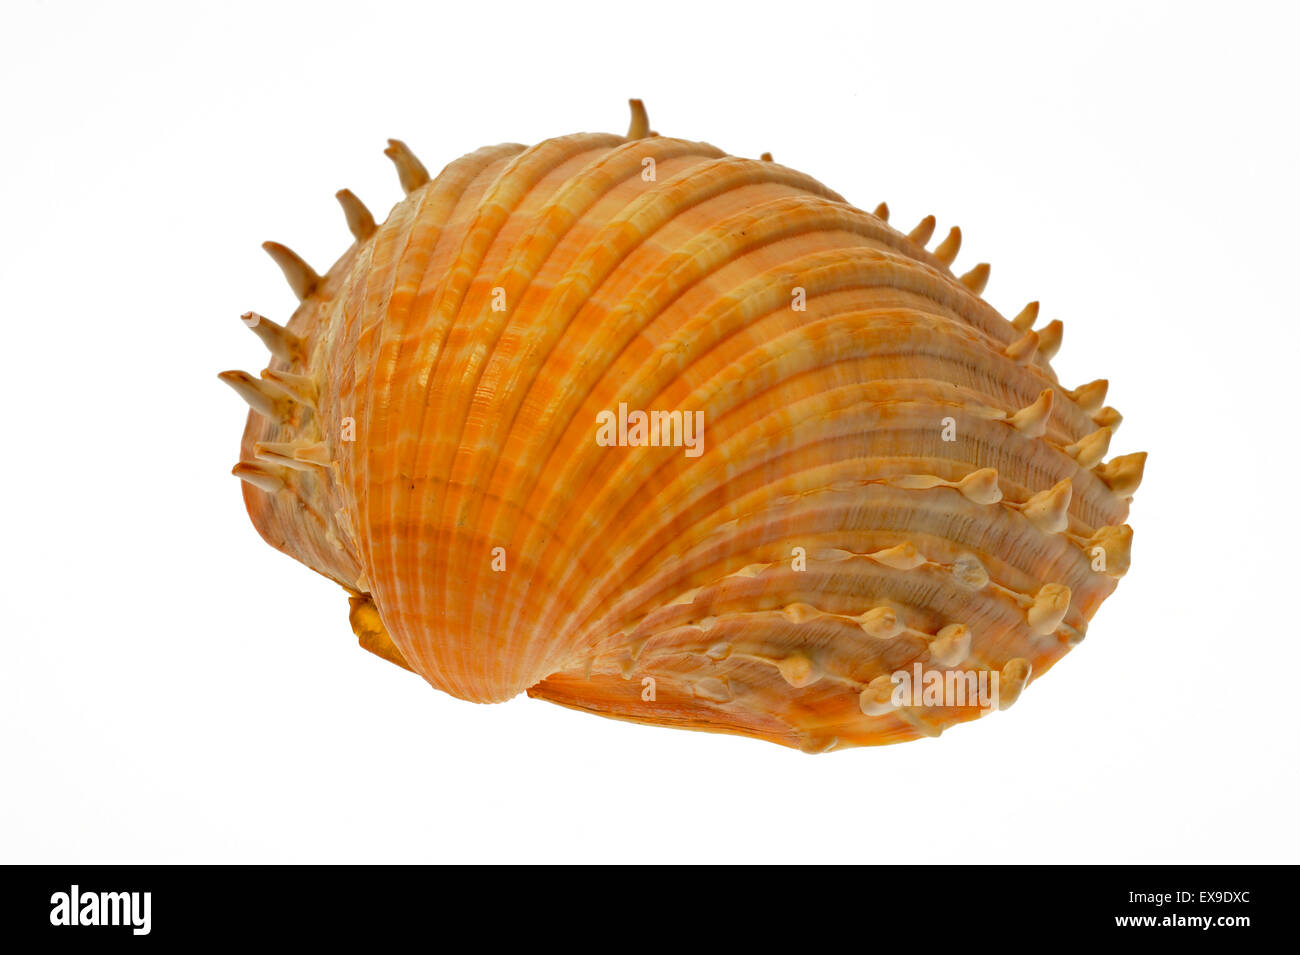 Prickly cockle (Acanthocardia echinata) shell on white background Stock Photo